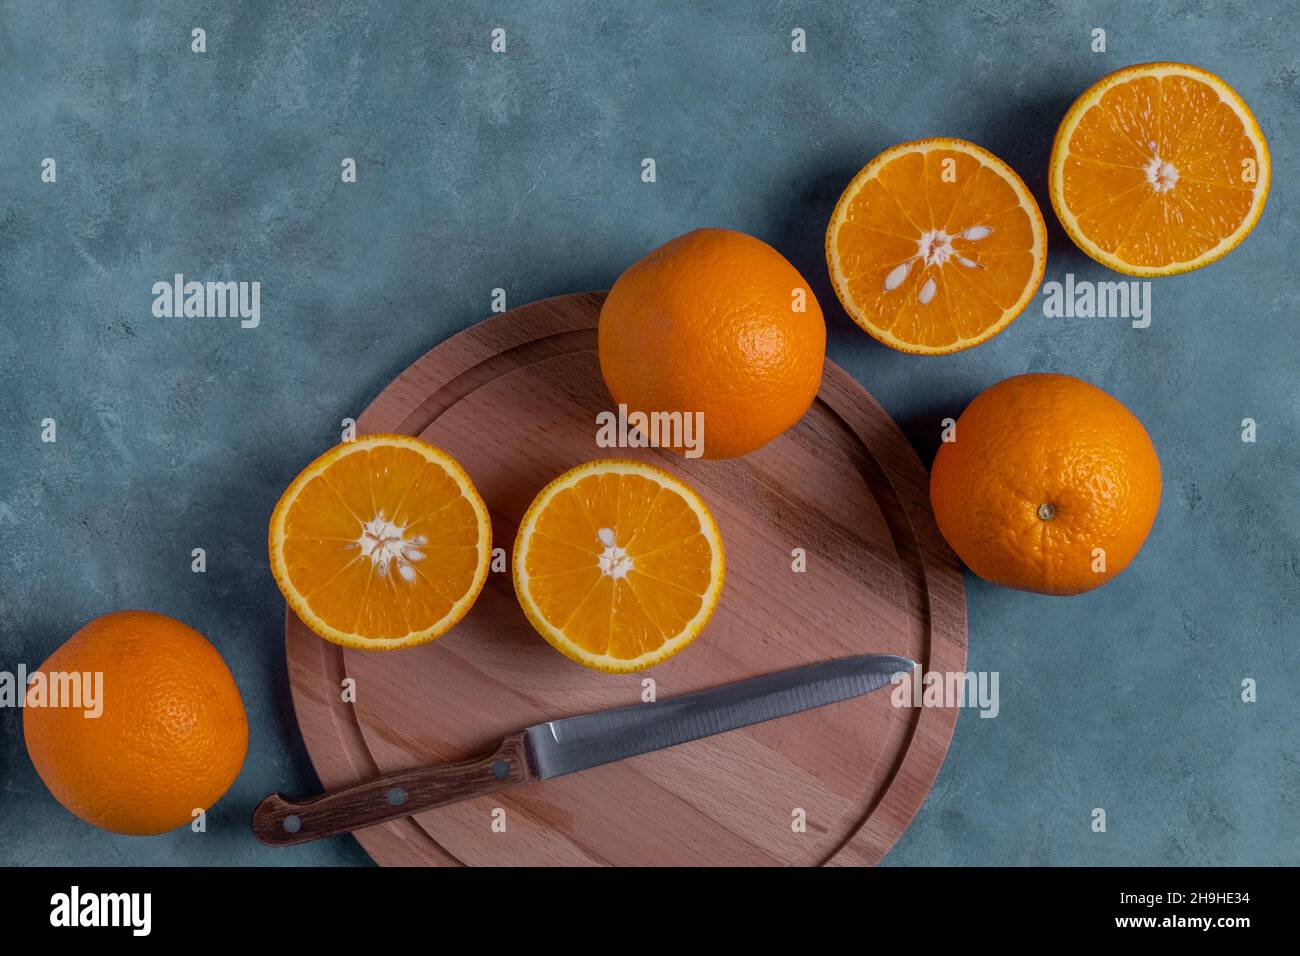 Close-up top view of ripe whole and halved oranges. Stock Photo